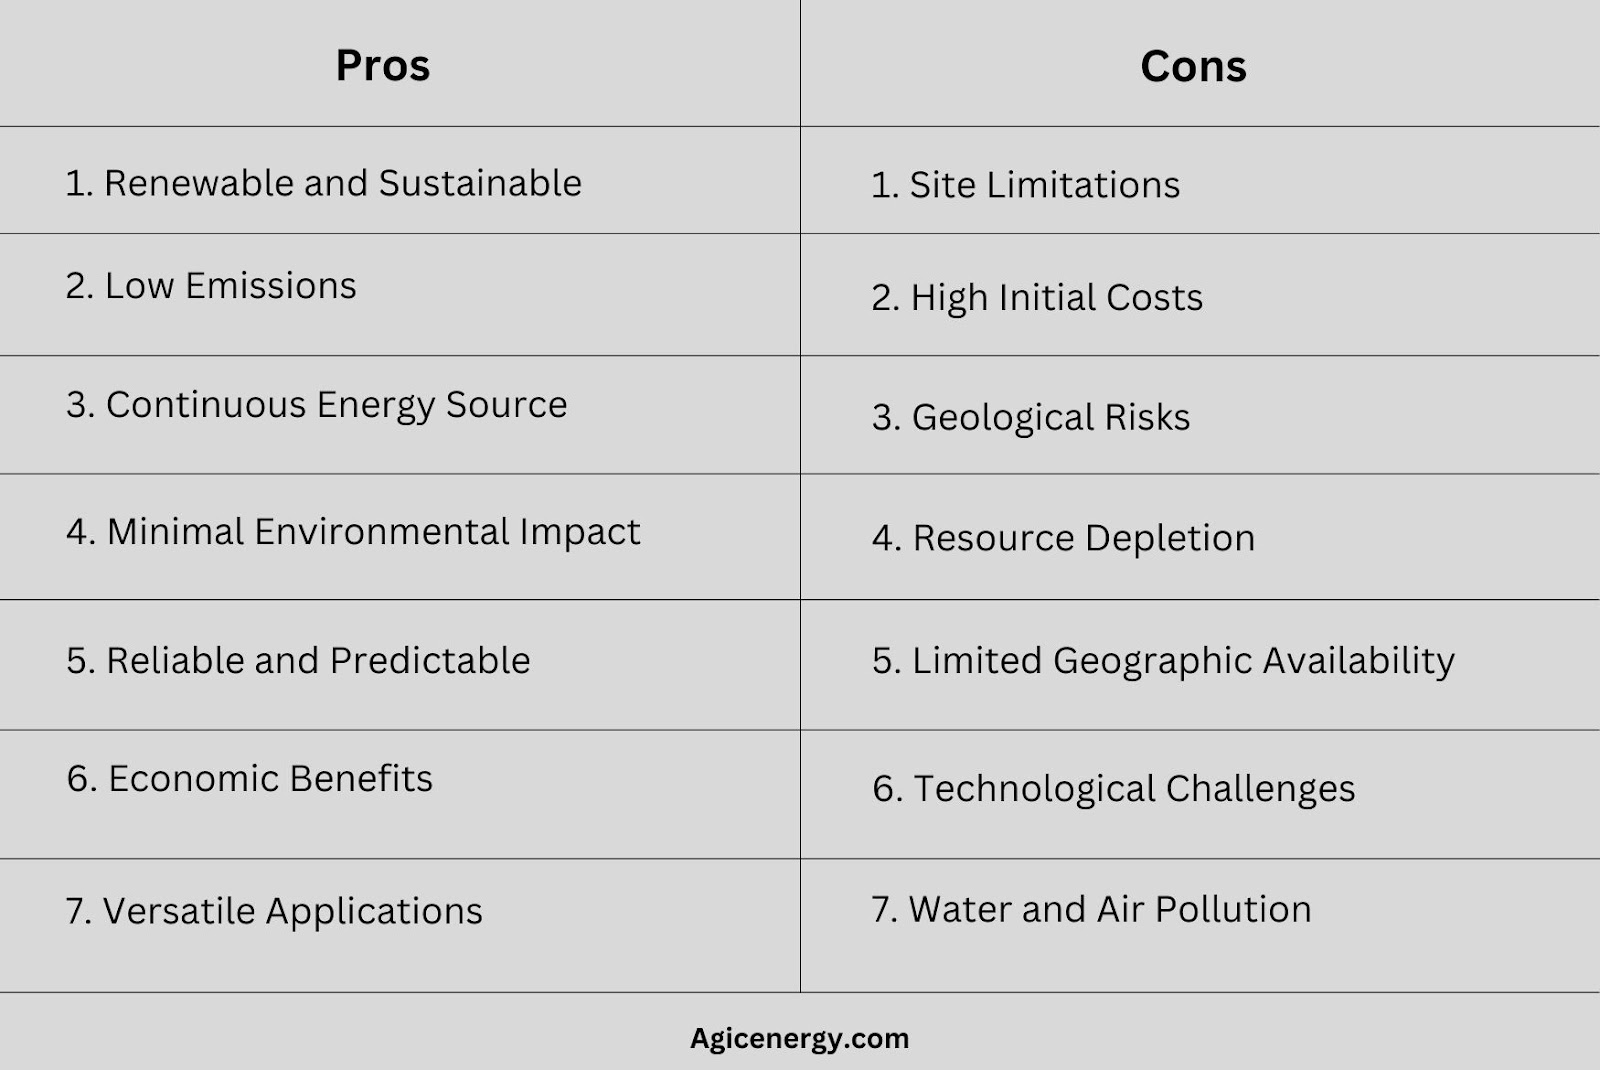 What Are the Pros And Cons Of Geothermal Energy